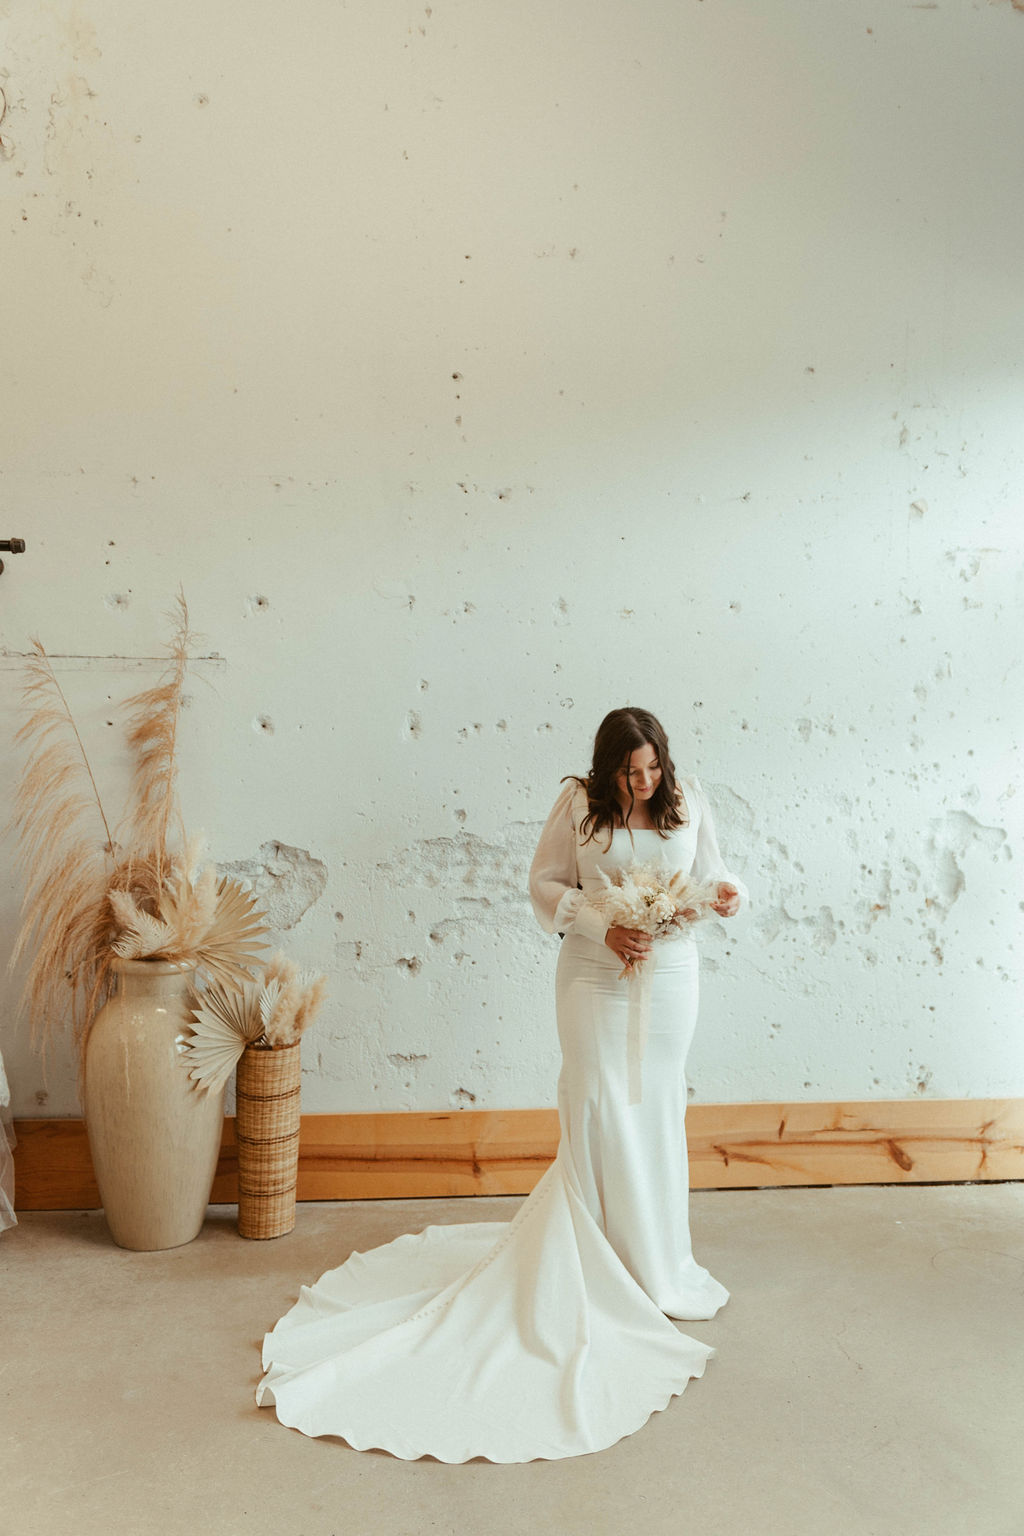 Vintage Lace Beach Wedding Dress With Long Sleeves, Applique Backless  Design 2021 Bohemian Country Style Bohemian Bridal Gowns With Hippie Gypsy  Vestido From Verycute, $56.34 | DHgate.Com